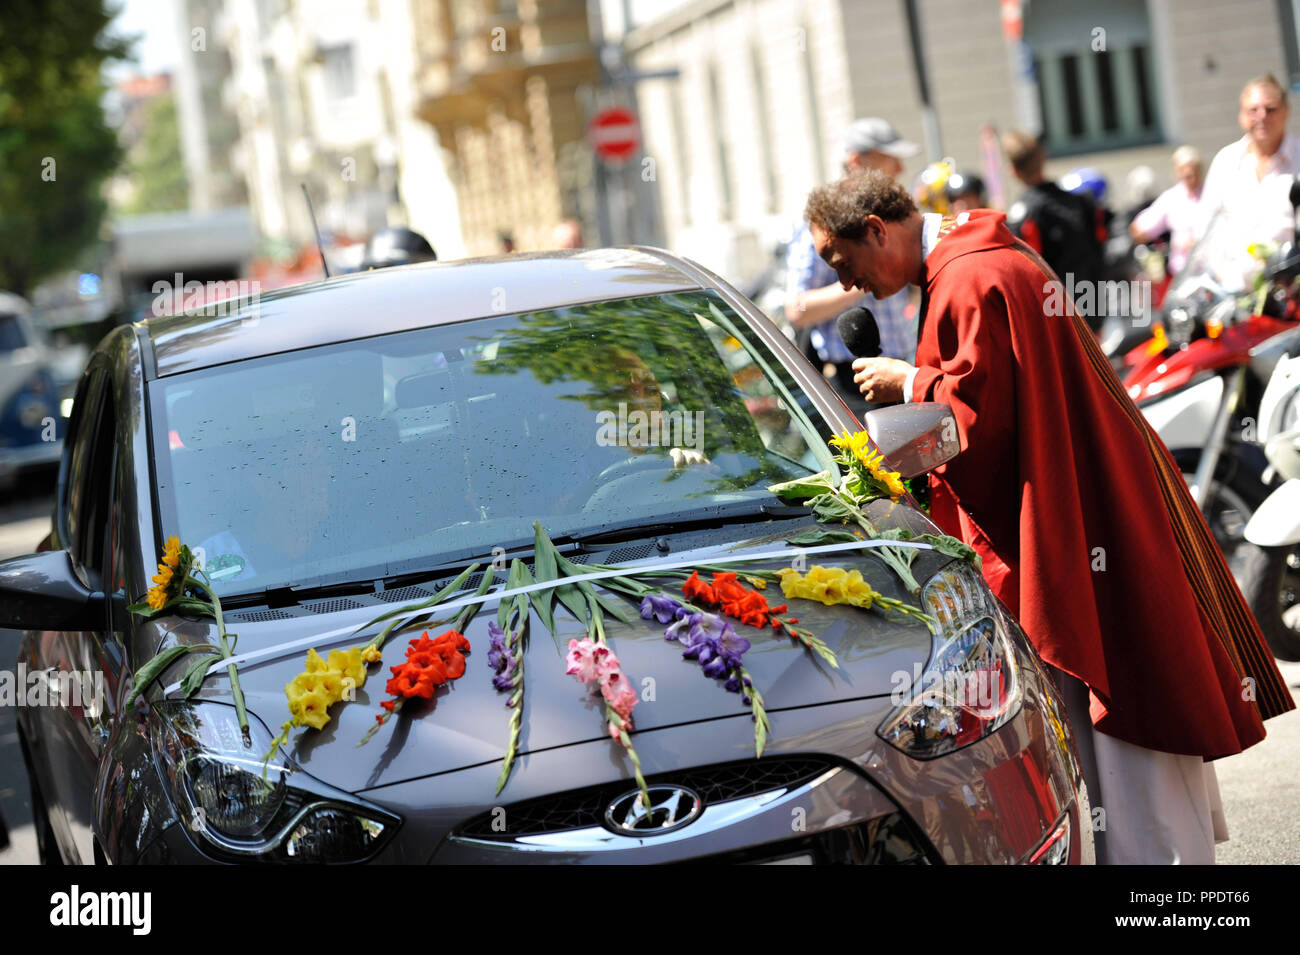 Rainer Maria Schiessler of the parish of St. Maximilian in Isarvorstadt blesses the vehicles of the attendants at the end of the worship in front of his church. The St. Christopher's Congregation Munich invites all traffic participants to receive God's blessing for 80 years. Stock Photo